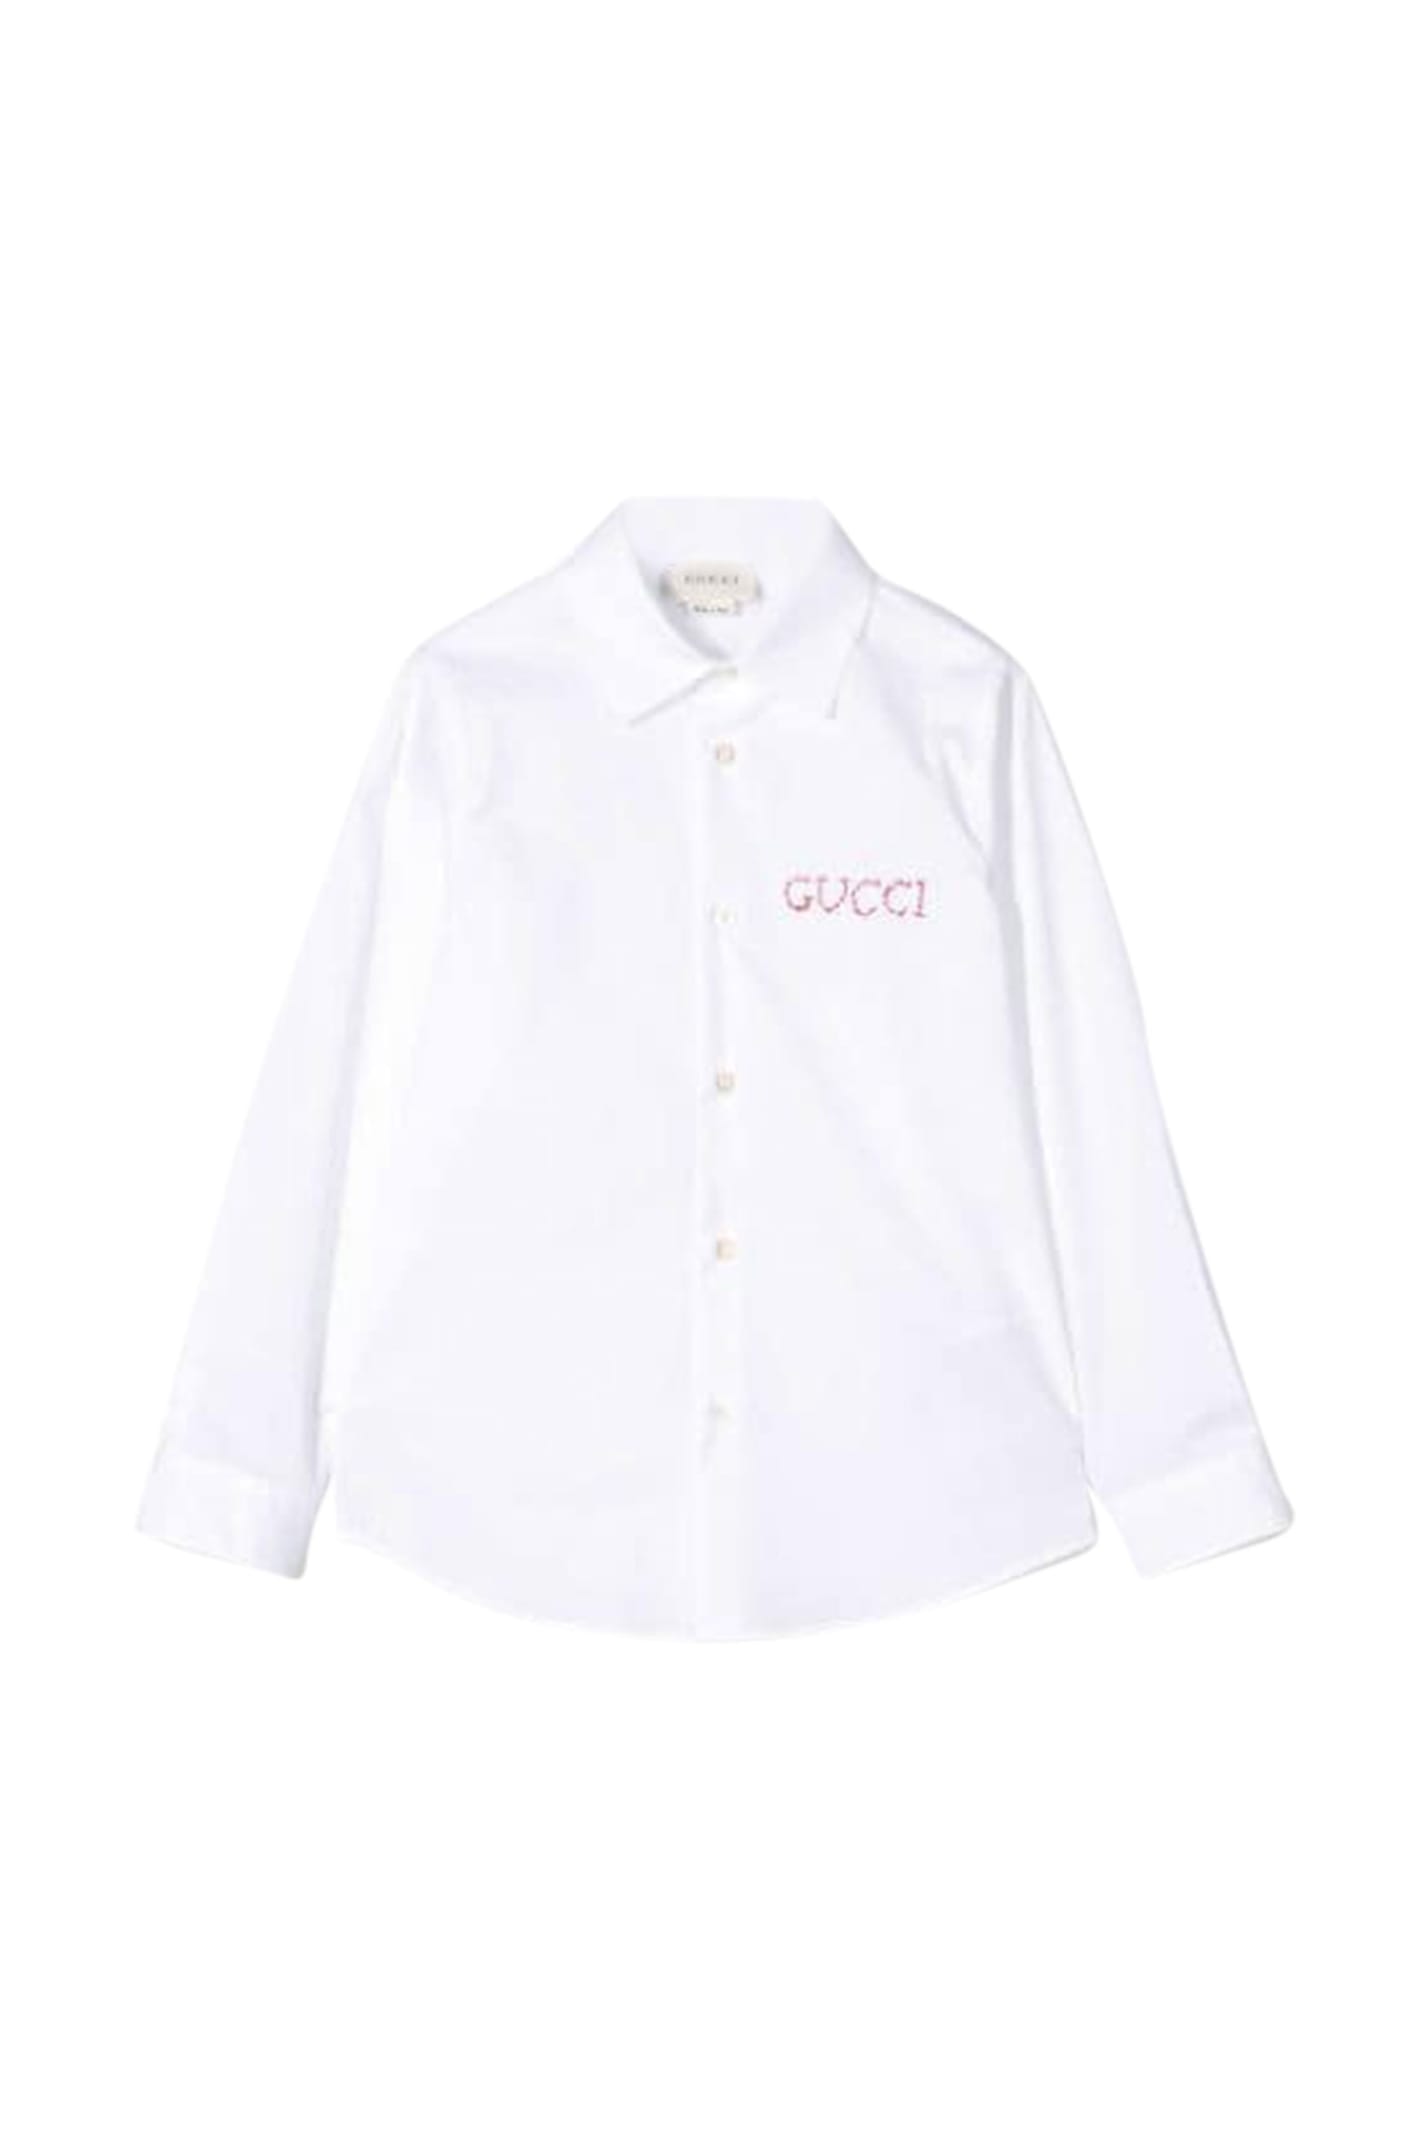 GUCCI KIDS SHIRT WITH EMBROIDERY,11246483